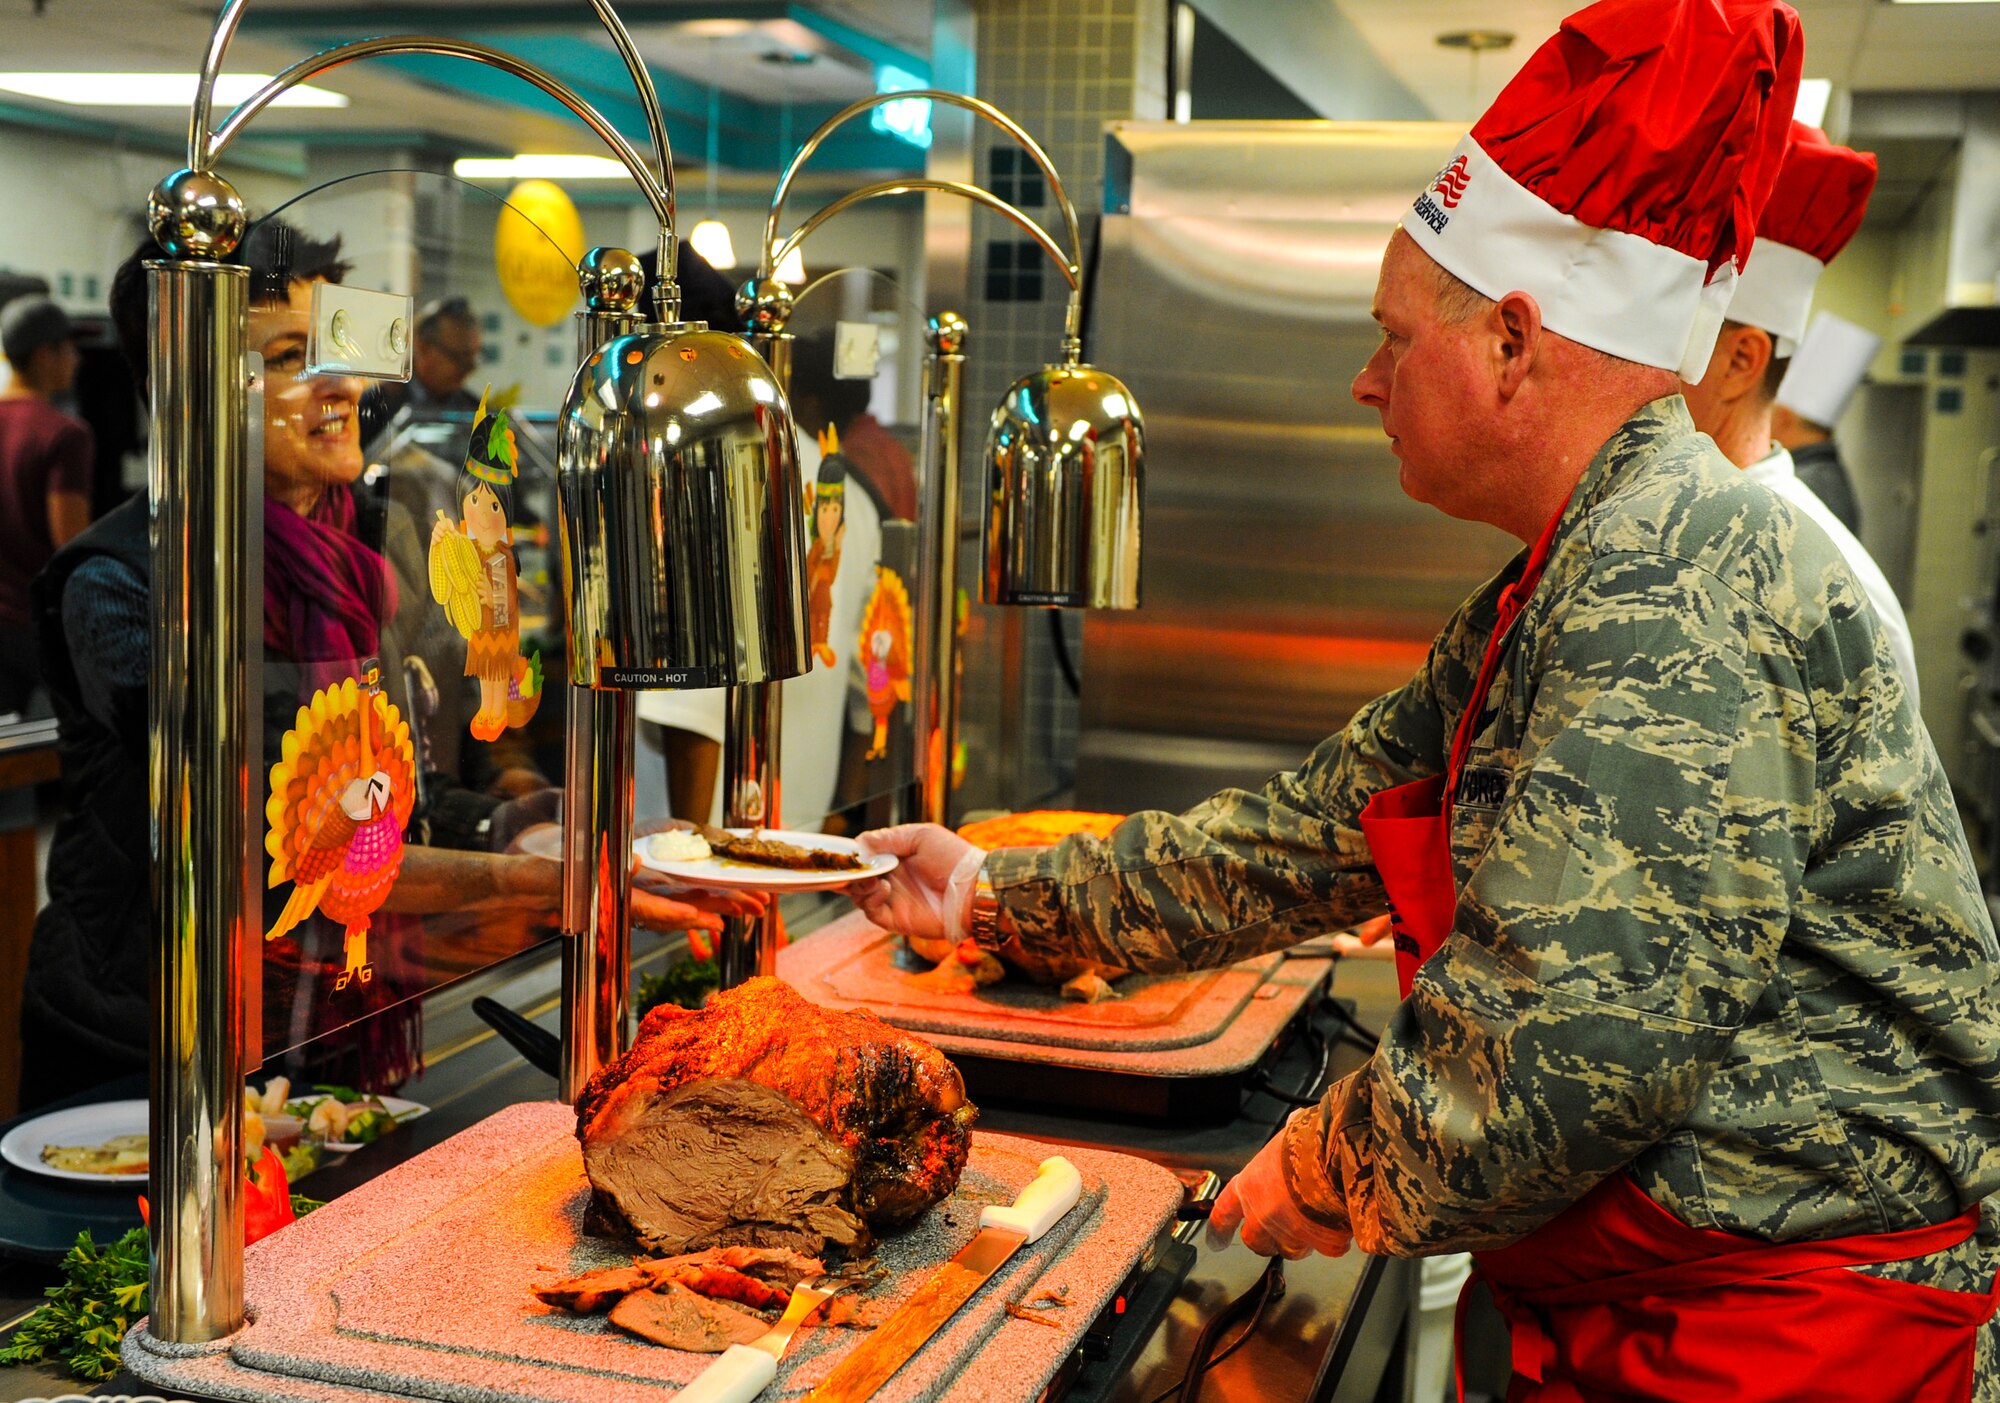 Maj. Gen. Morris Haase, Air Force Special Operations Command vice commander, serves roast beef to visitors of the Reef Dining Facility at Hurlburt Field, Fla., Nov. 27, 2014. The Reef Dining Facility was open to Air Commandos and retirees for Thanksgiving lunch. (U.S. Air Force photo/Senior Airman Christopher Callaway) 